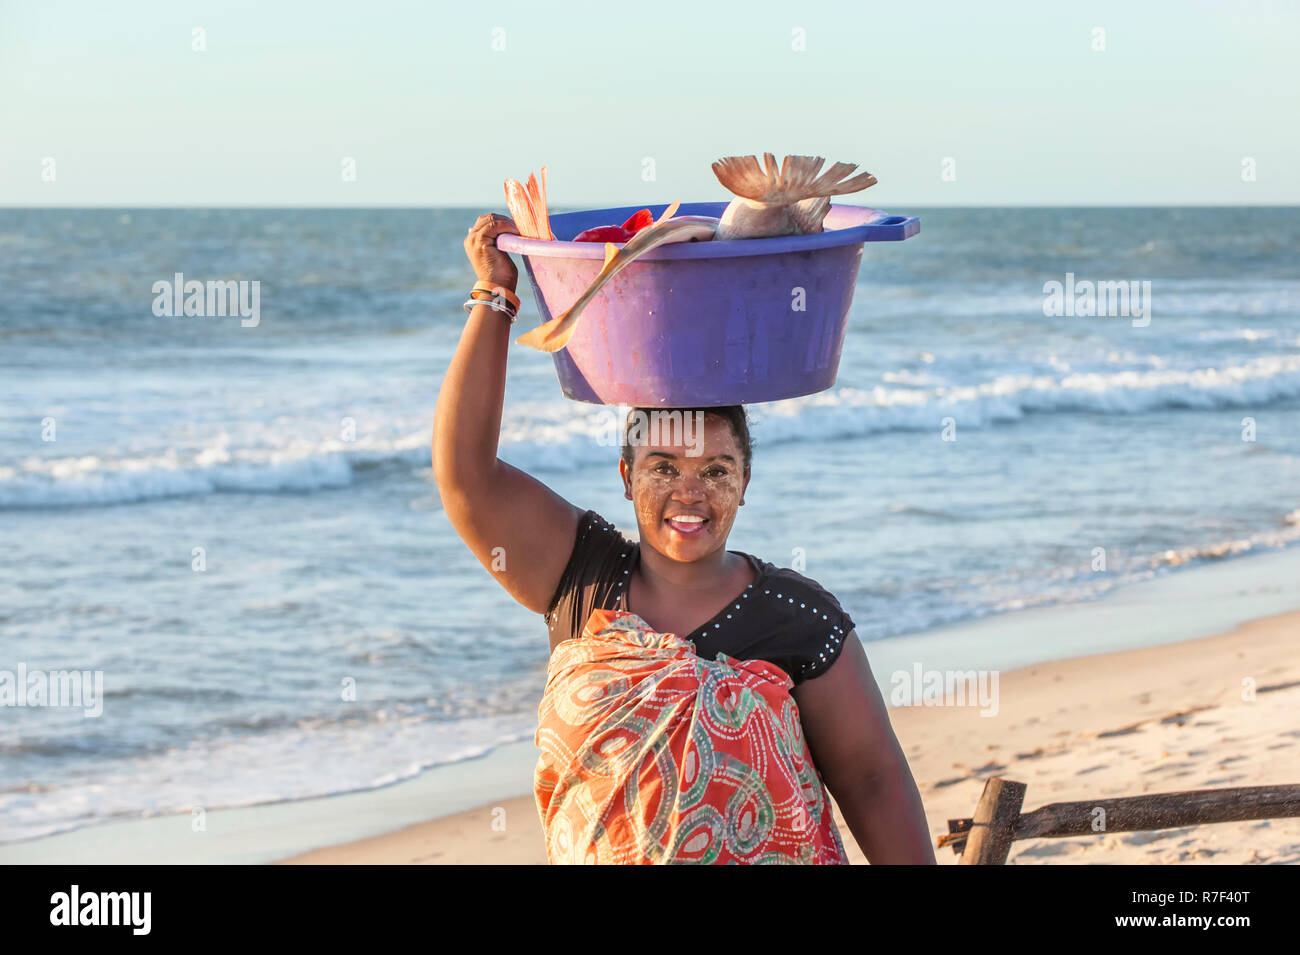 Malagasy woman carrying fish in a tub on her head, Morondava, Toliara province, Madagascar Stock Photo